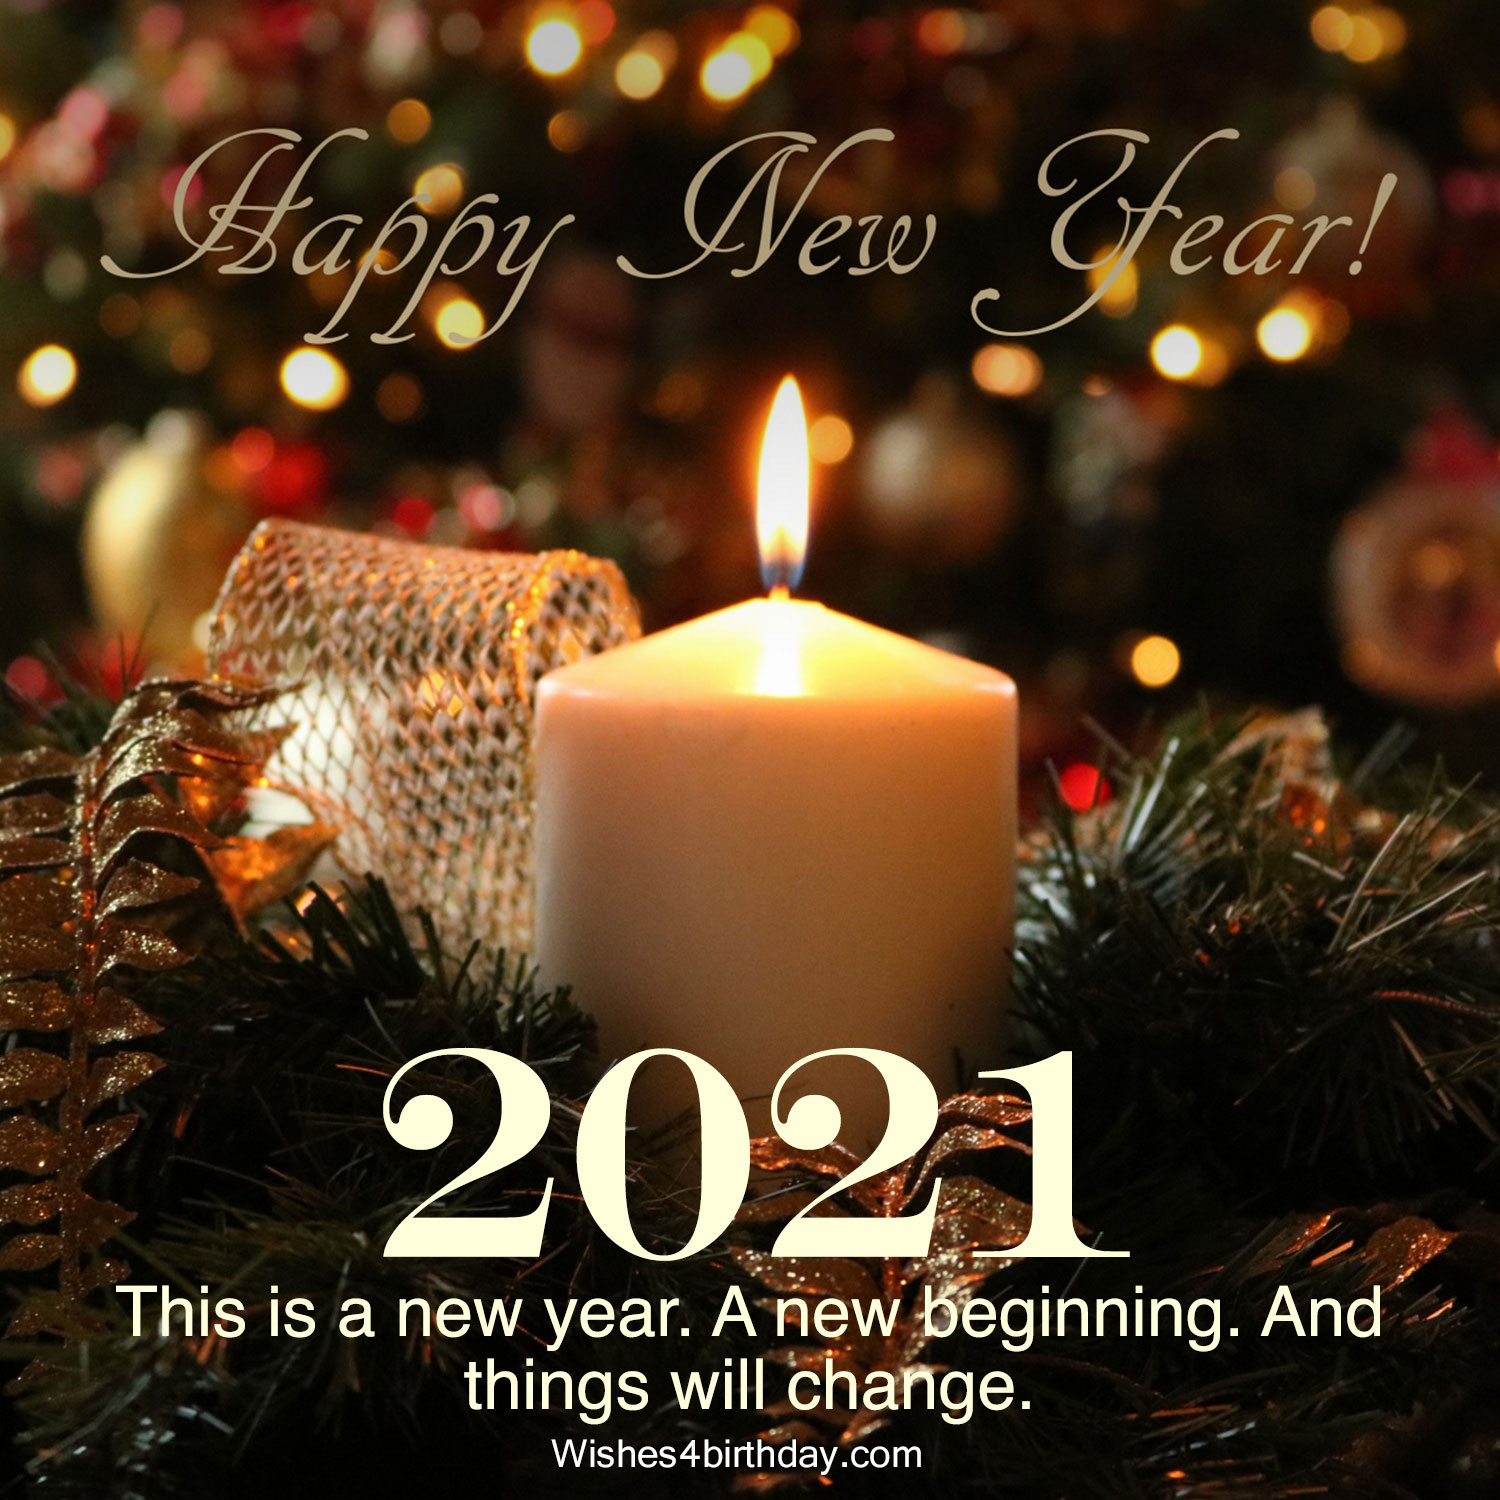 Top-animated-pic-of-Happy-new-year-2021-with-countdown.jpg